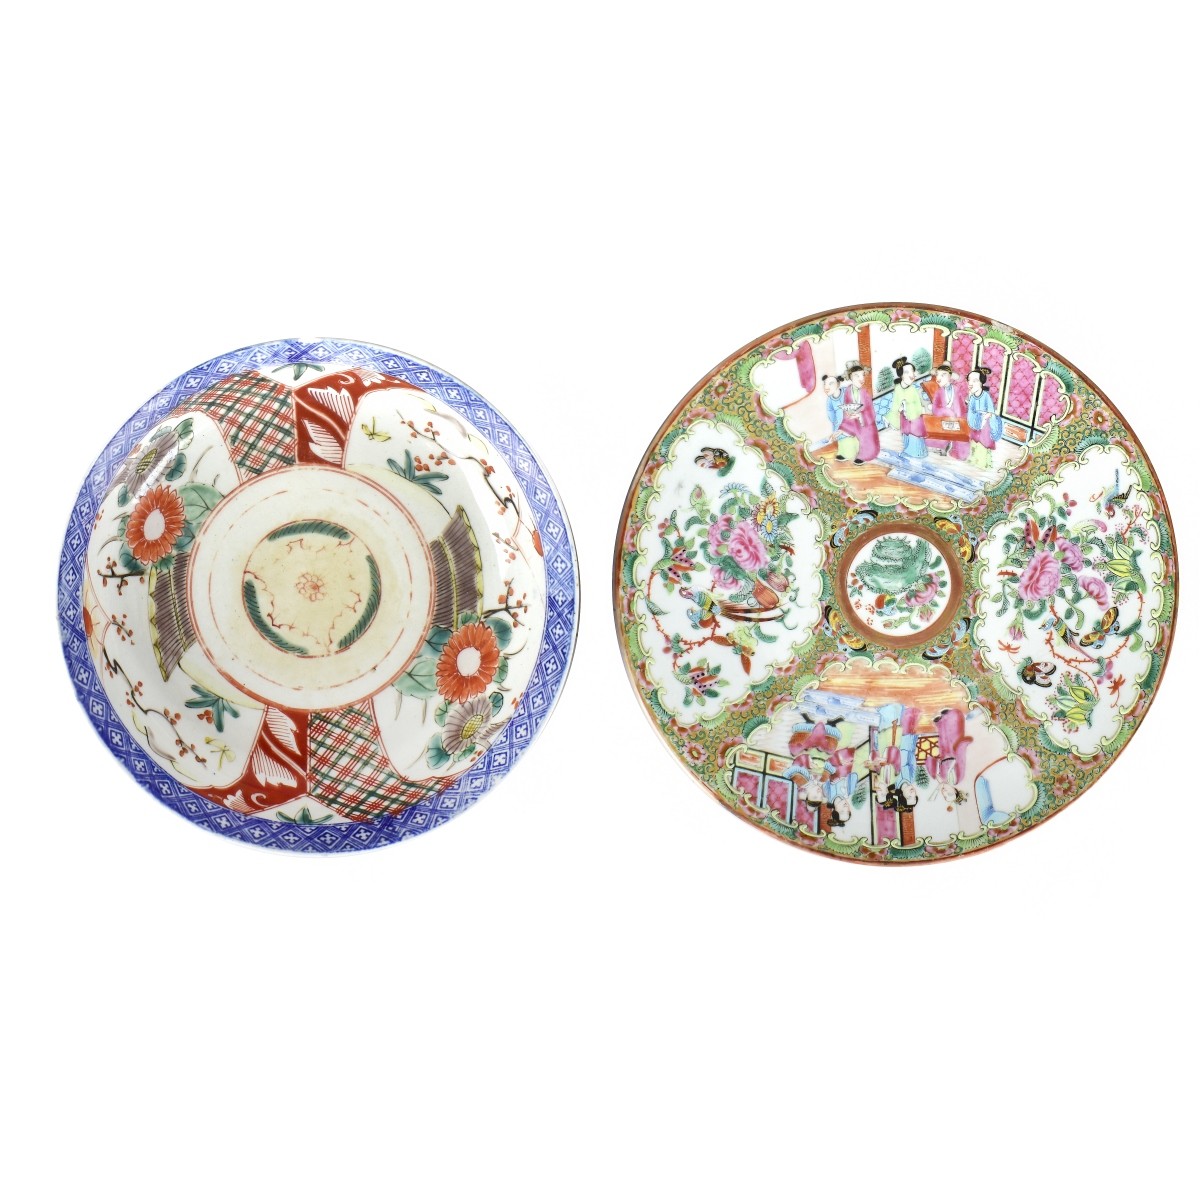 Two Antique Asian Porcelain Plate and Bowl